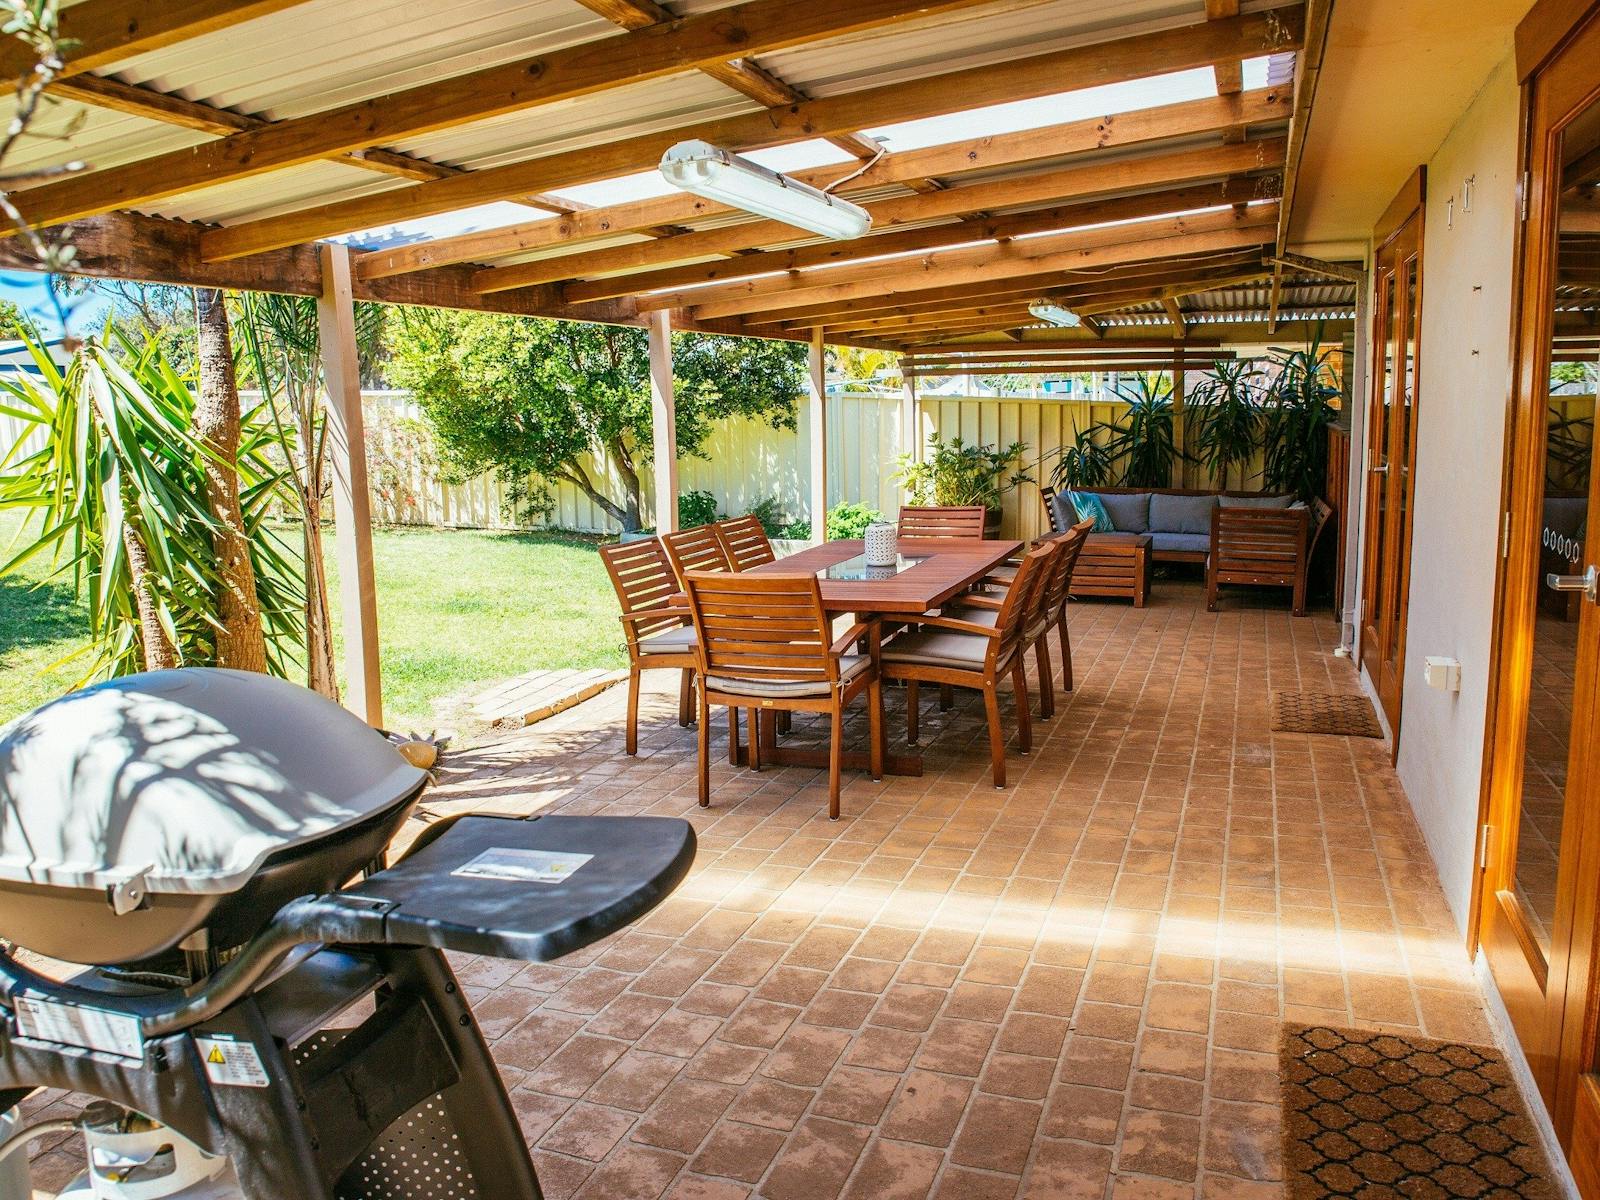 Spacious outdoor entertaining area - the perfect place to relax.